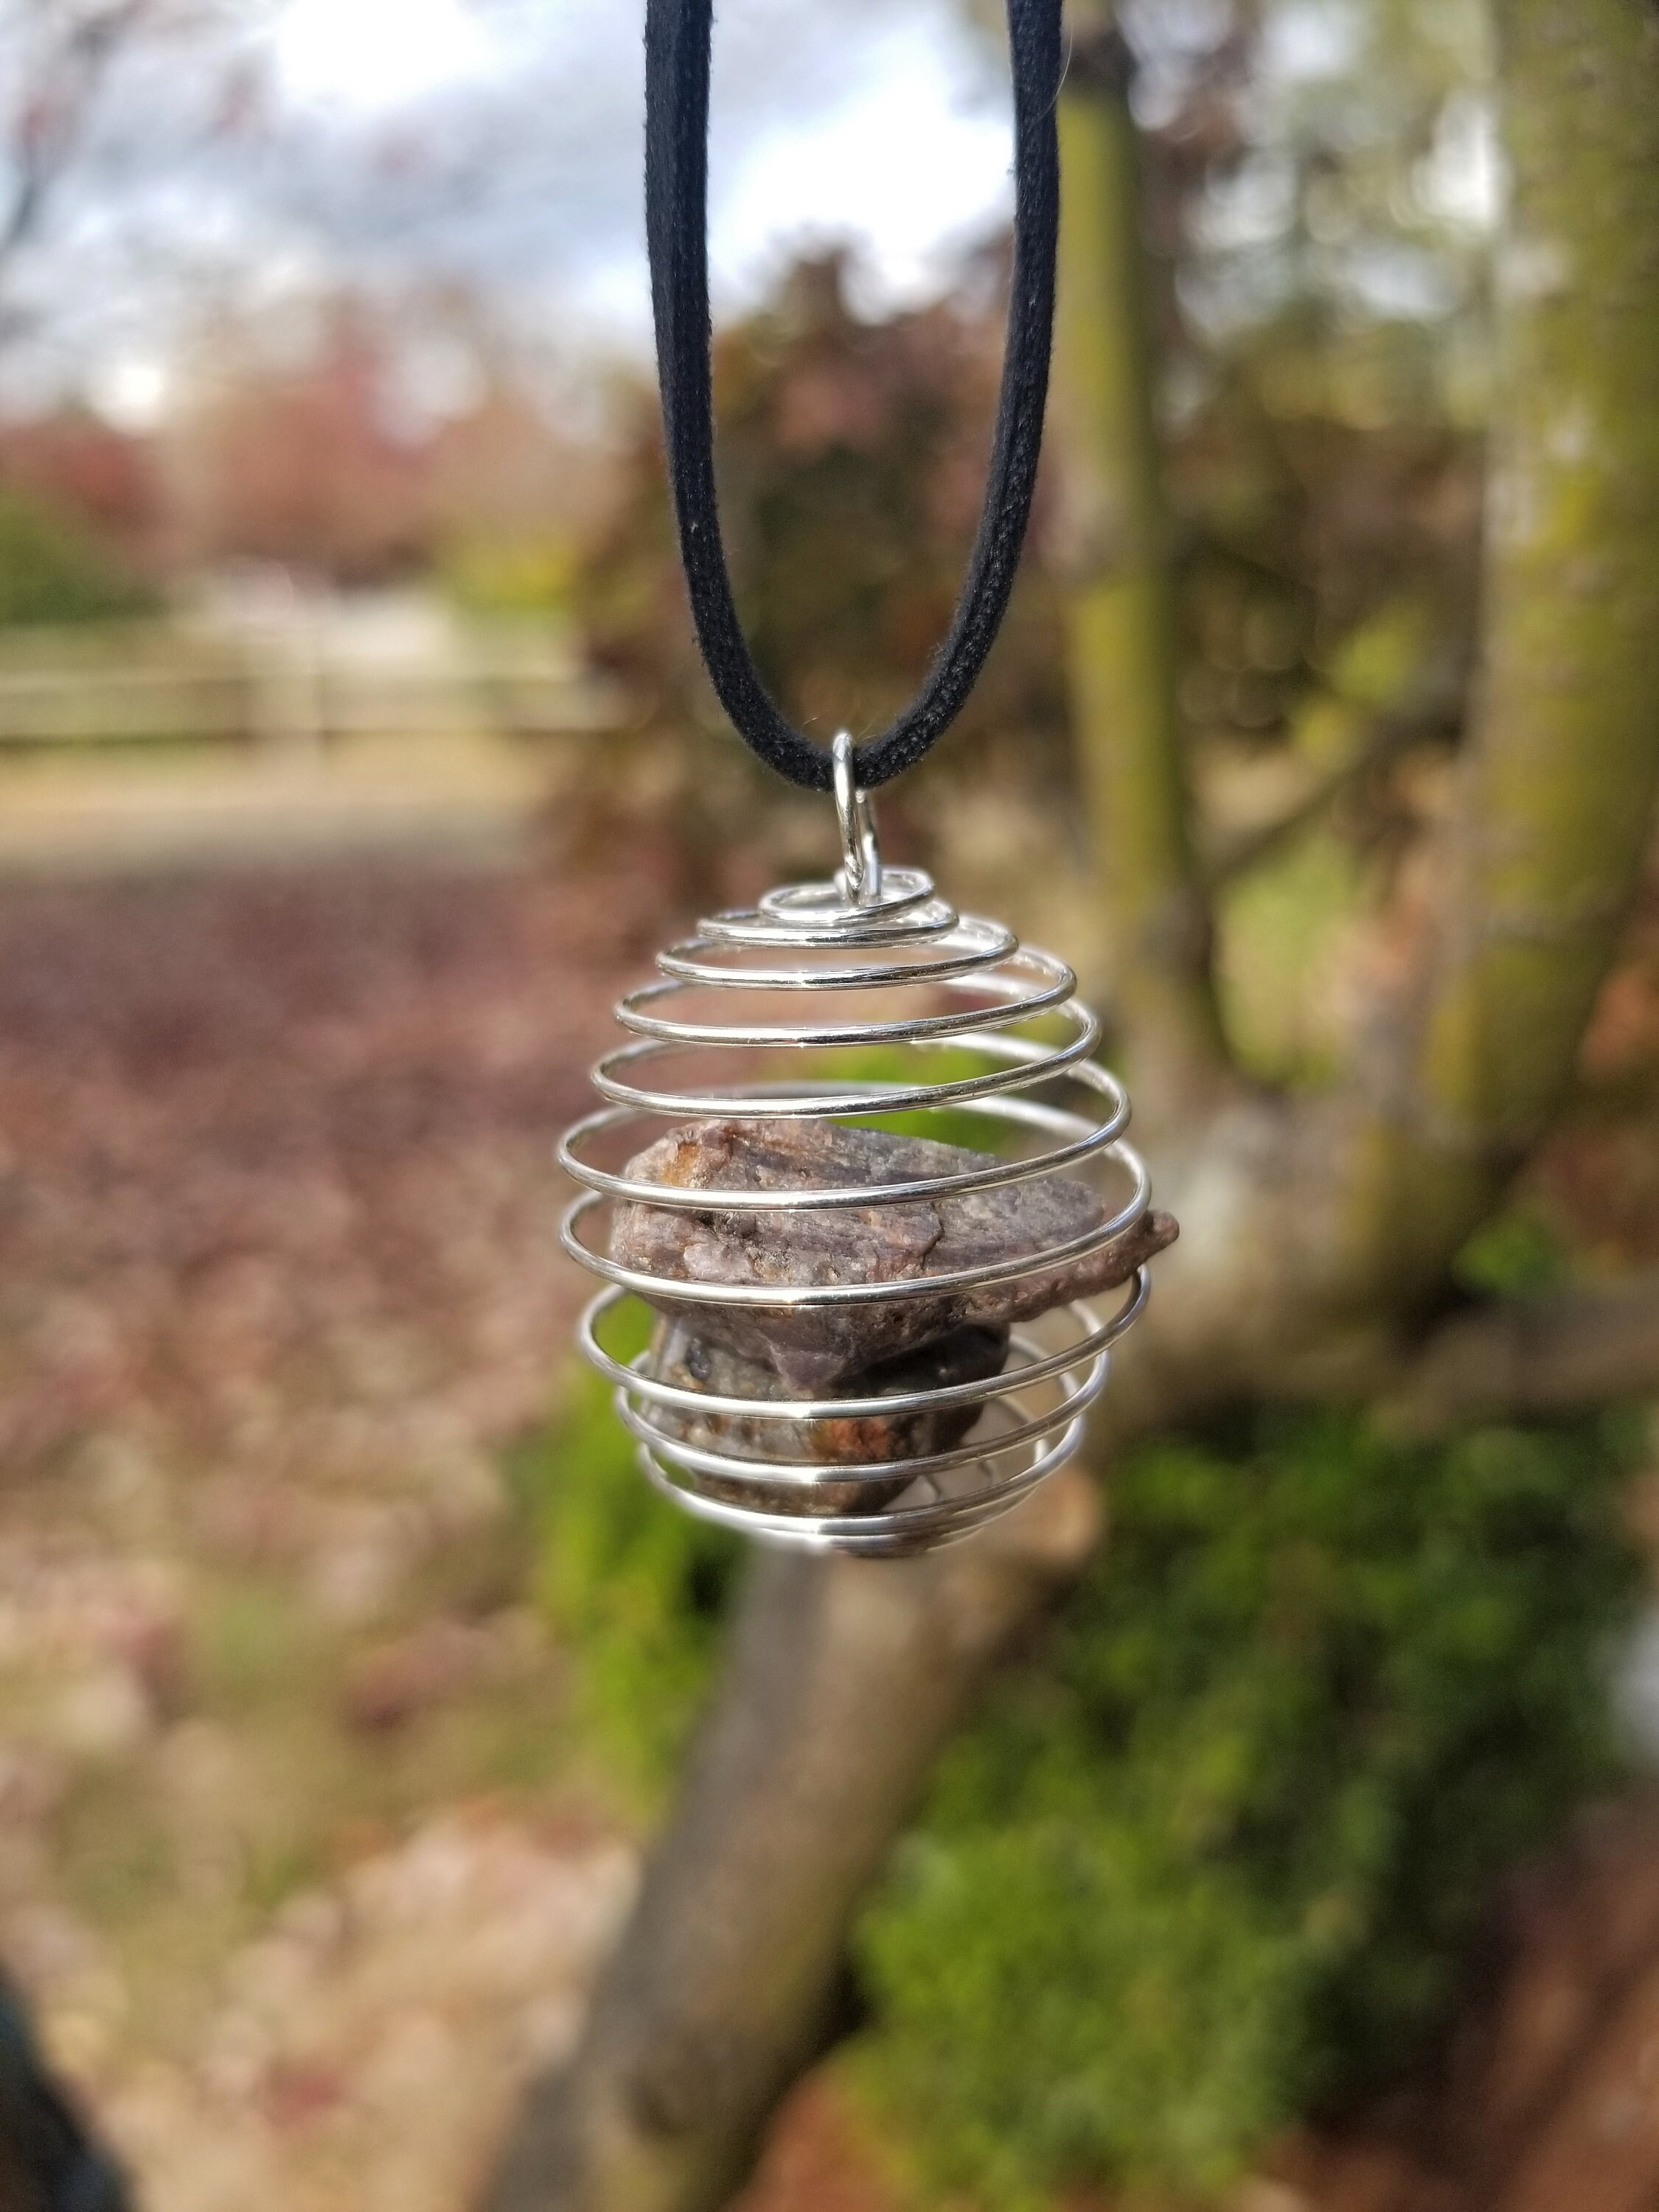 Stone Cage Necklace